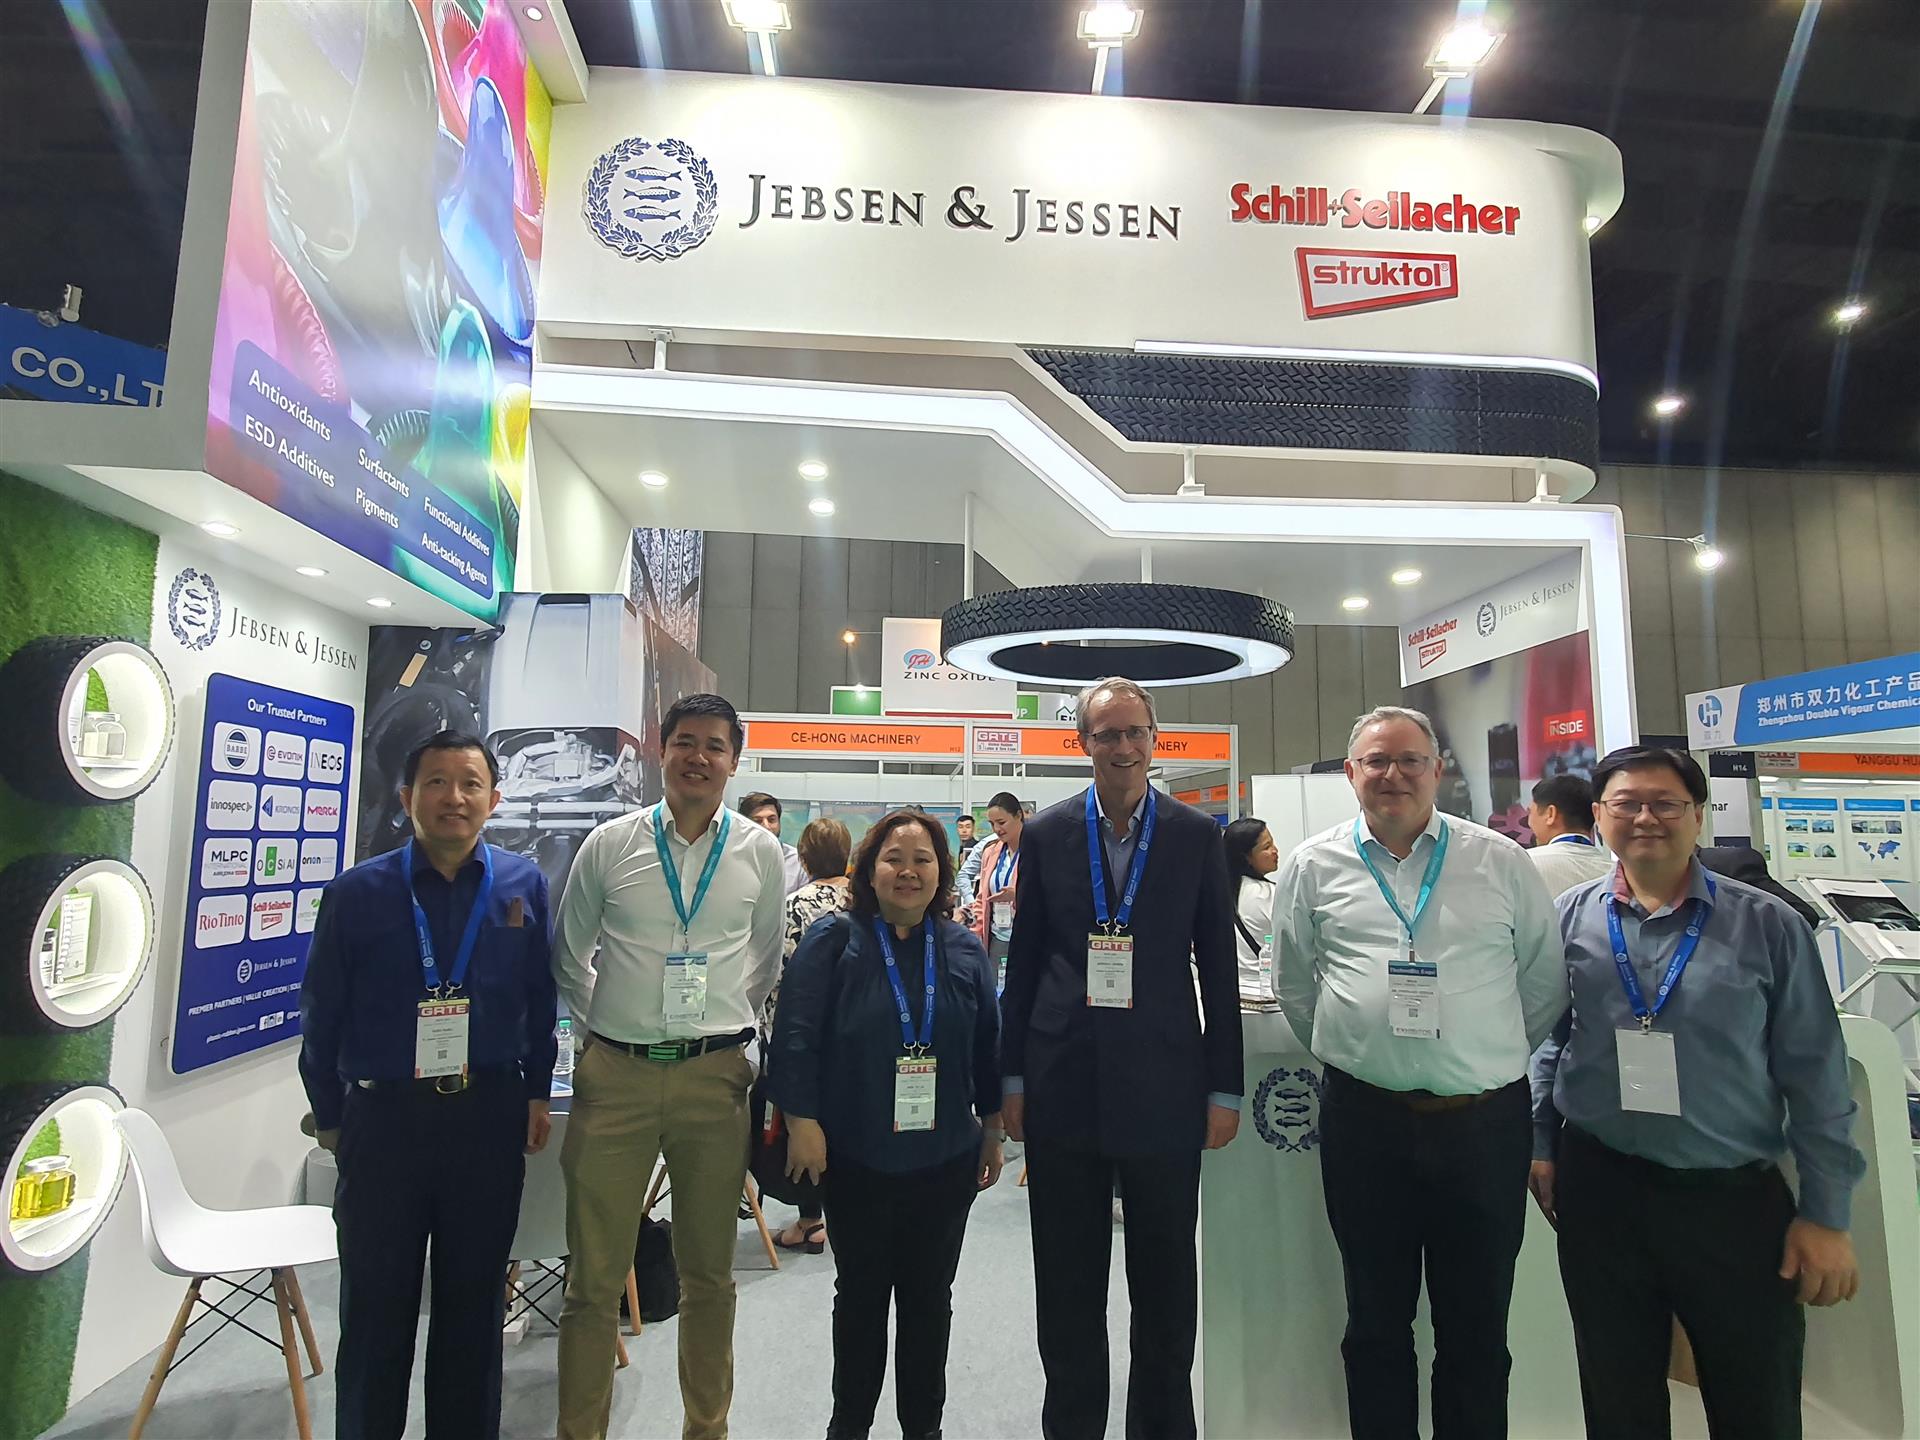 GRTE - JJ team standing in front of booth with supplier